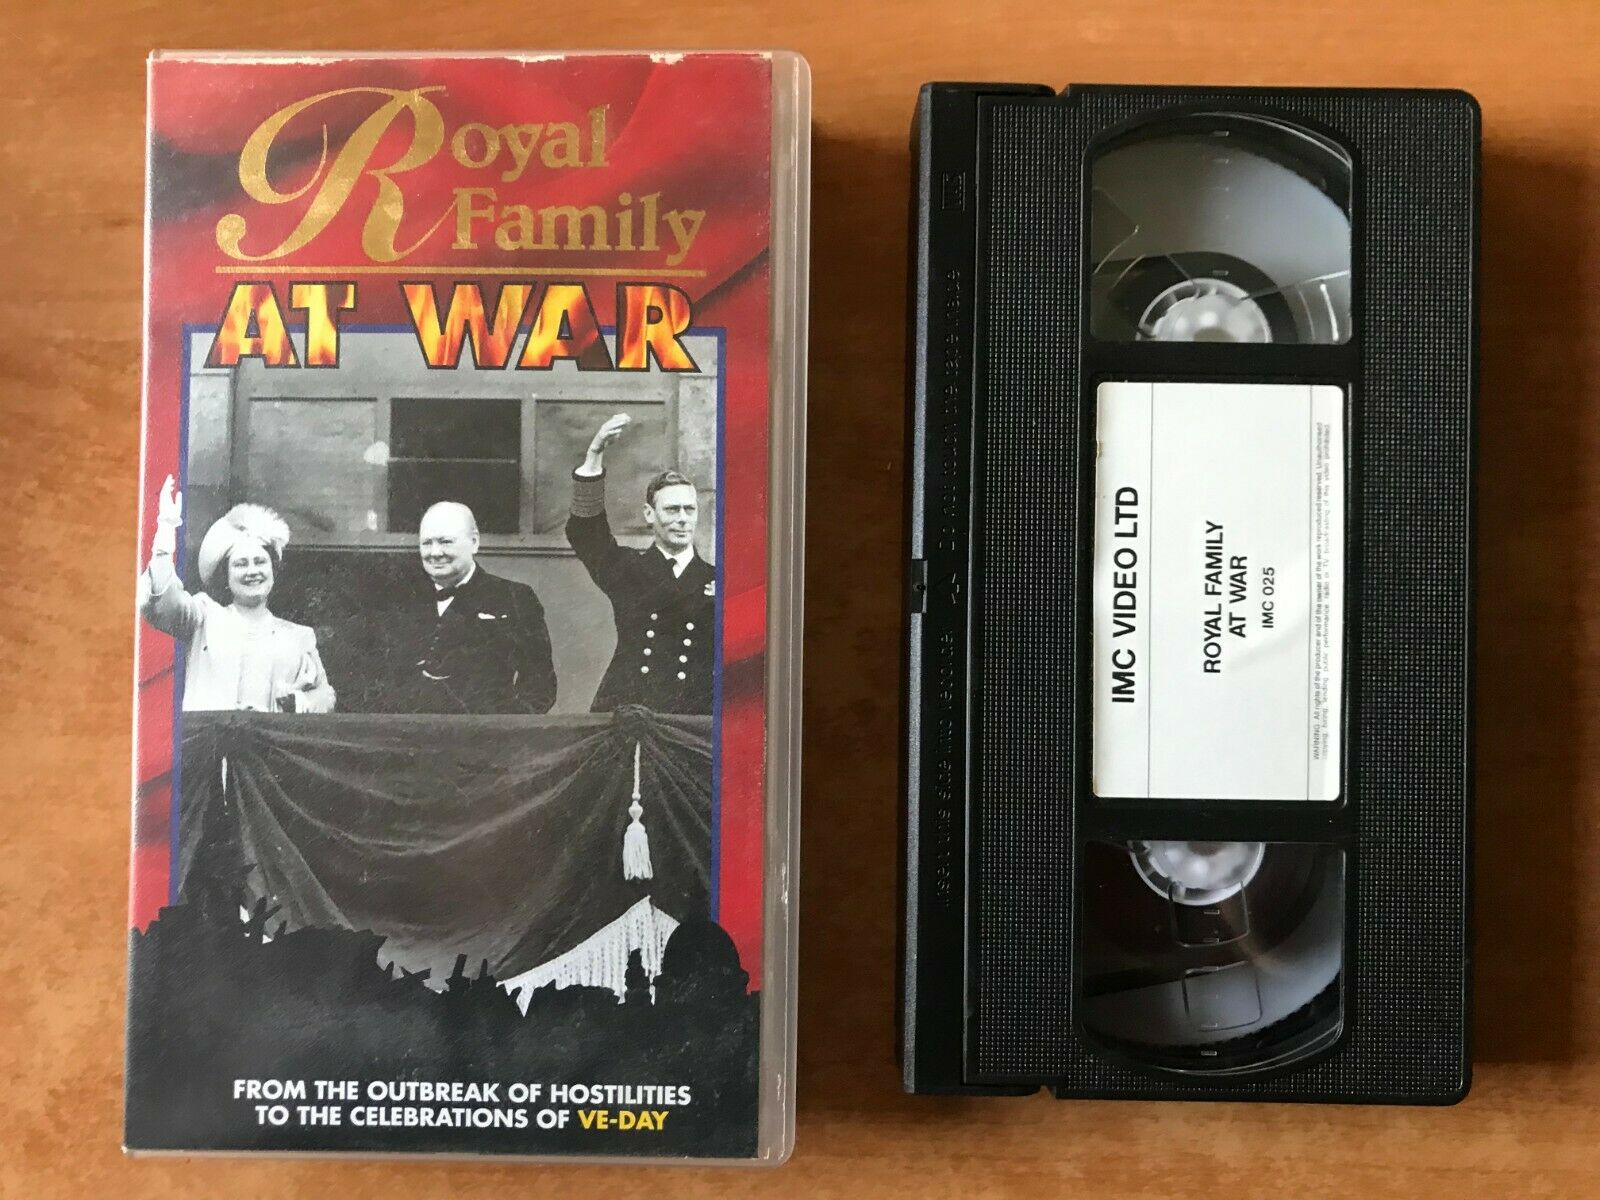 Royal Family At War [Documentary]: War World 2 - Ve-Day - Peter Townsend - VHS-